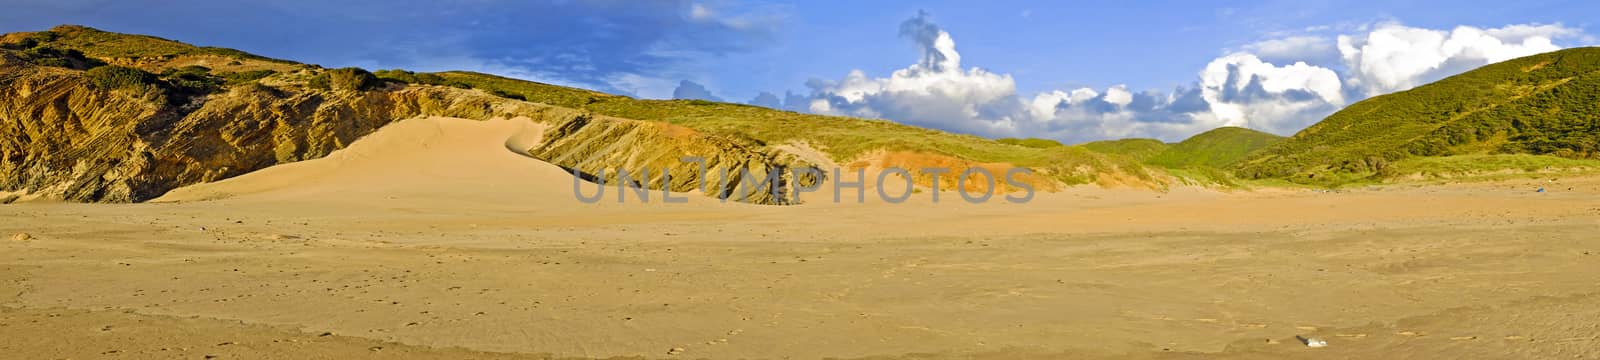 Rocks and sanddunes at Vale Figueiras in Portugal